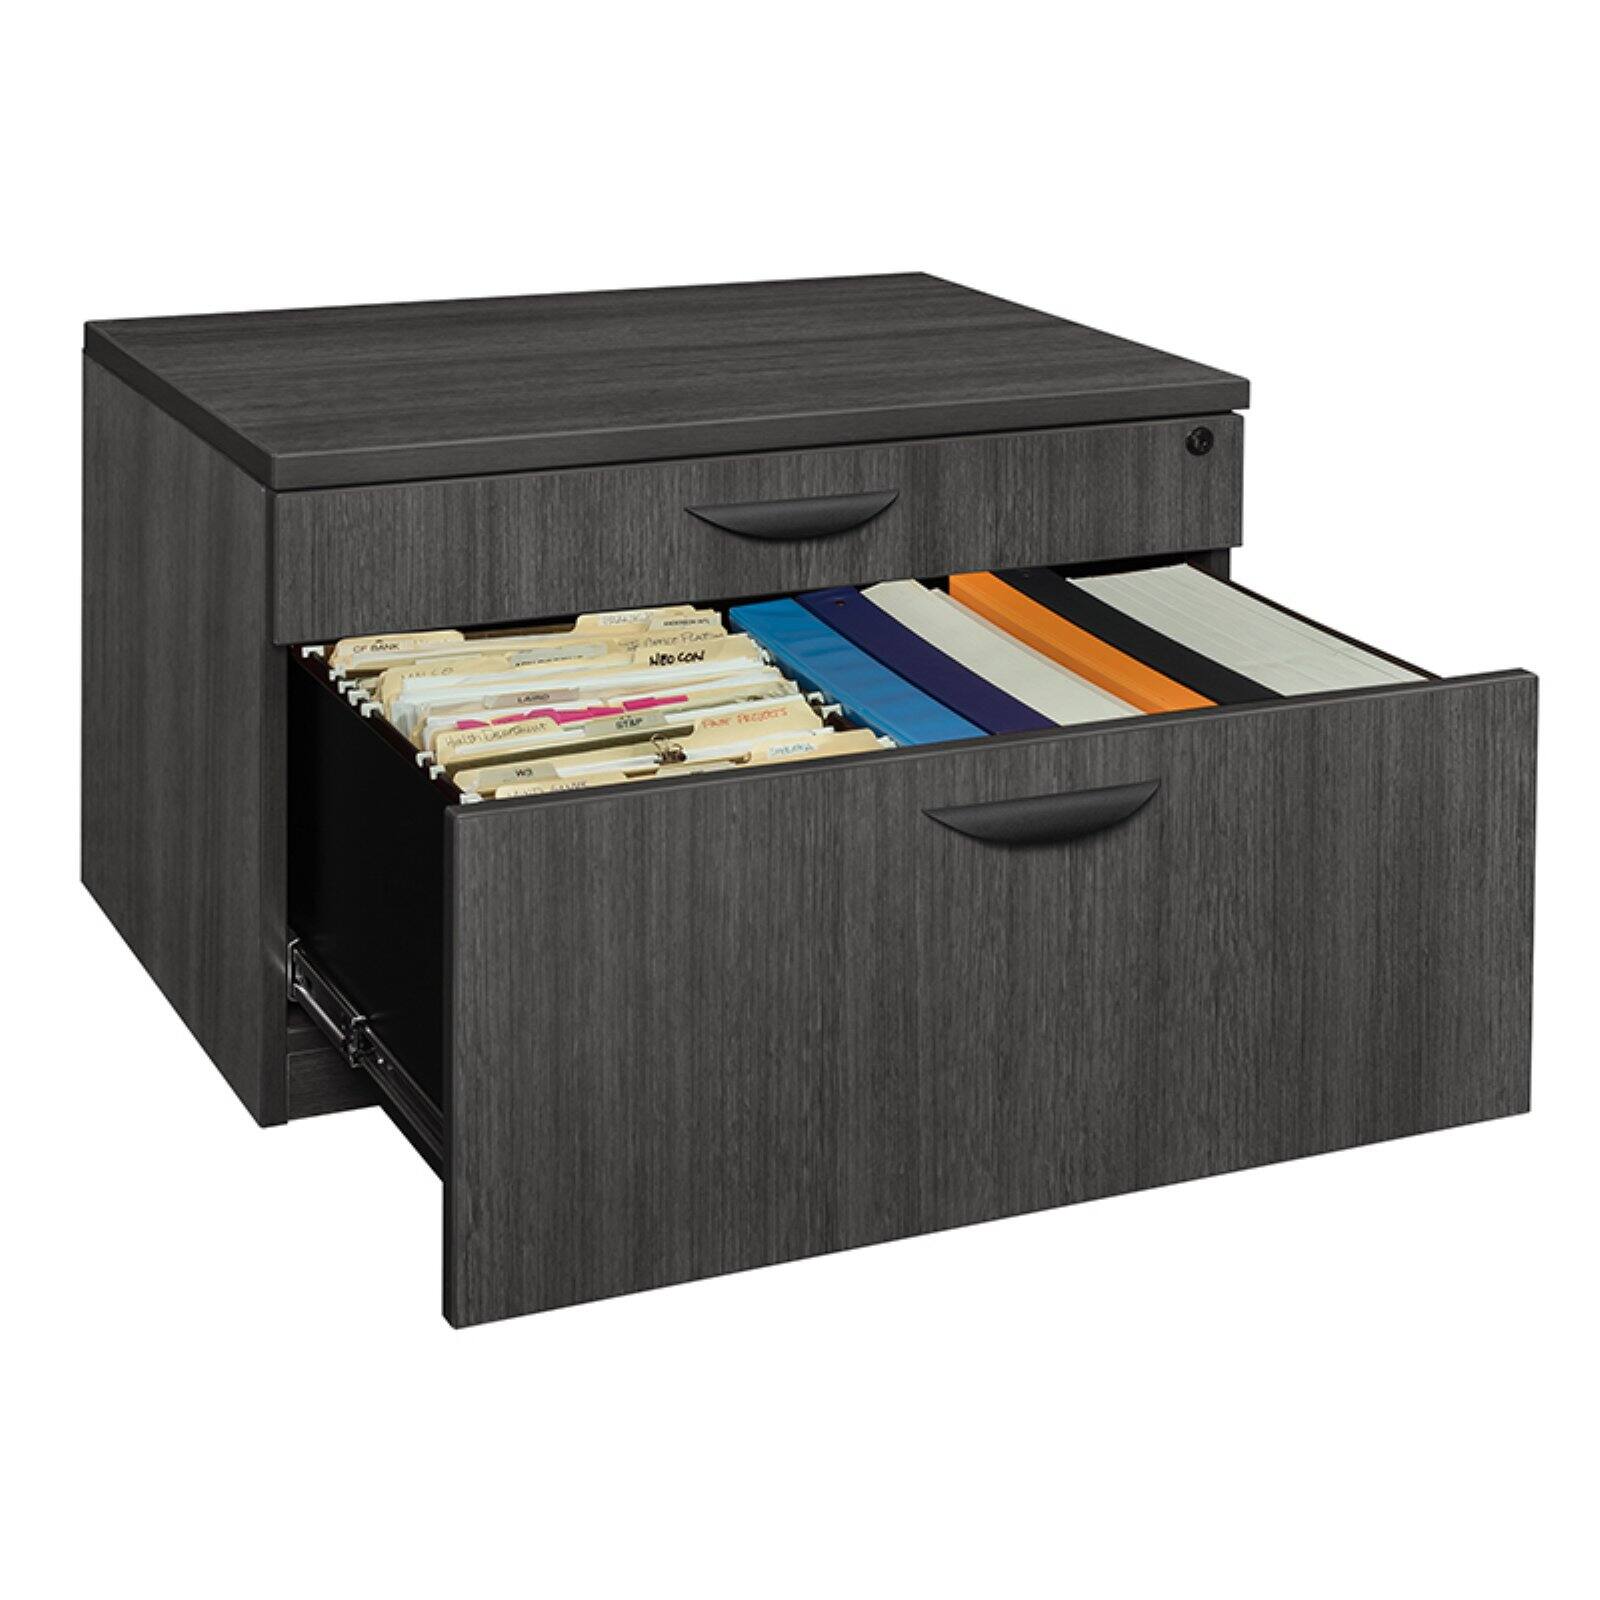 Regency Legacy 20 in. 2 Drawer Low Lateral File- Cherry - image 4 of 7